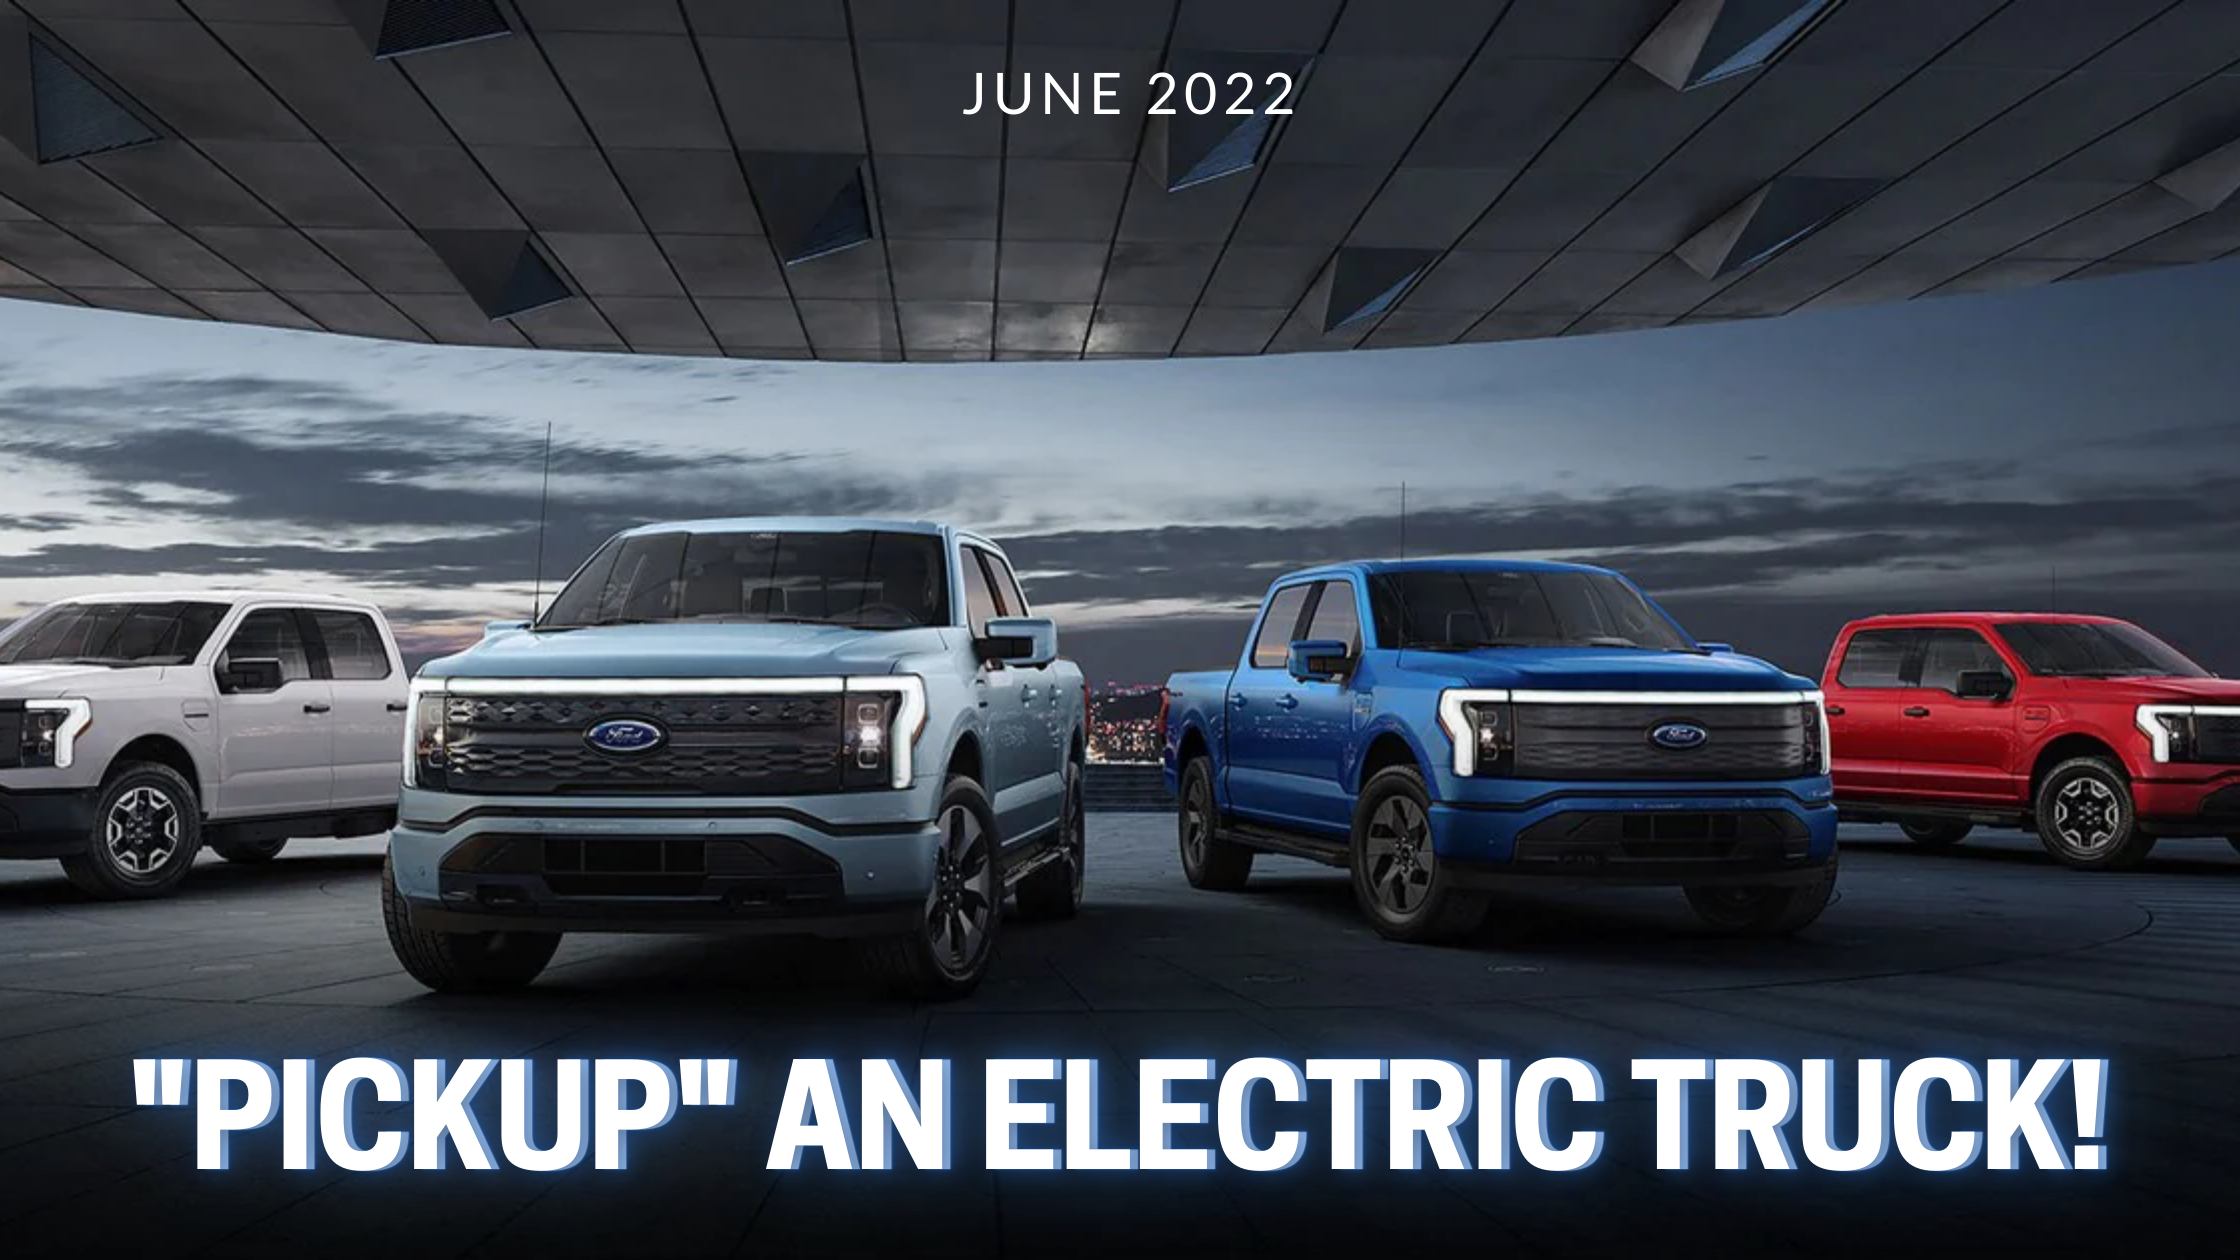 Read more about the article “Pickup” an Electric Truck!